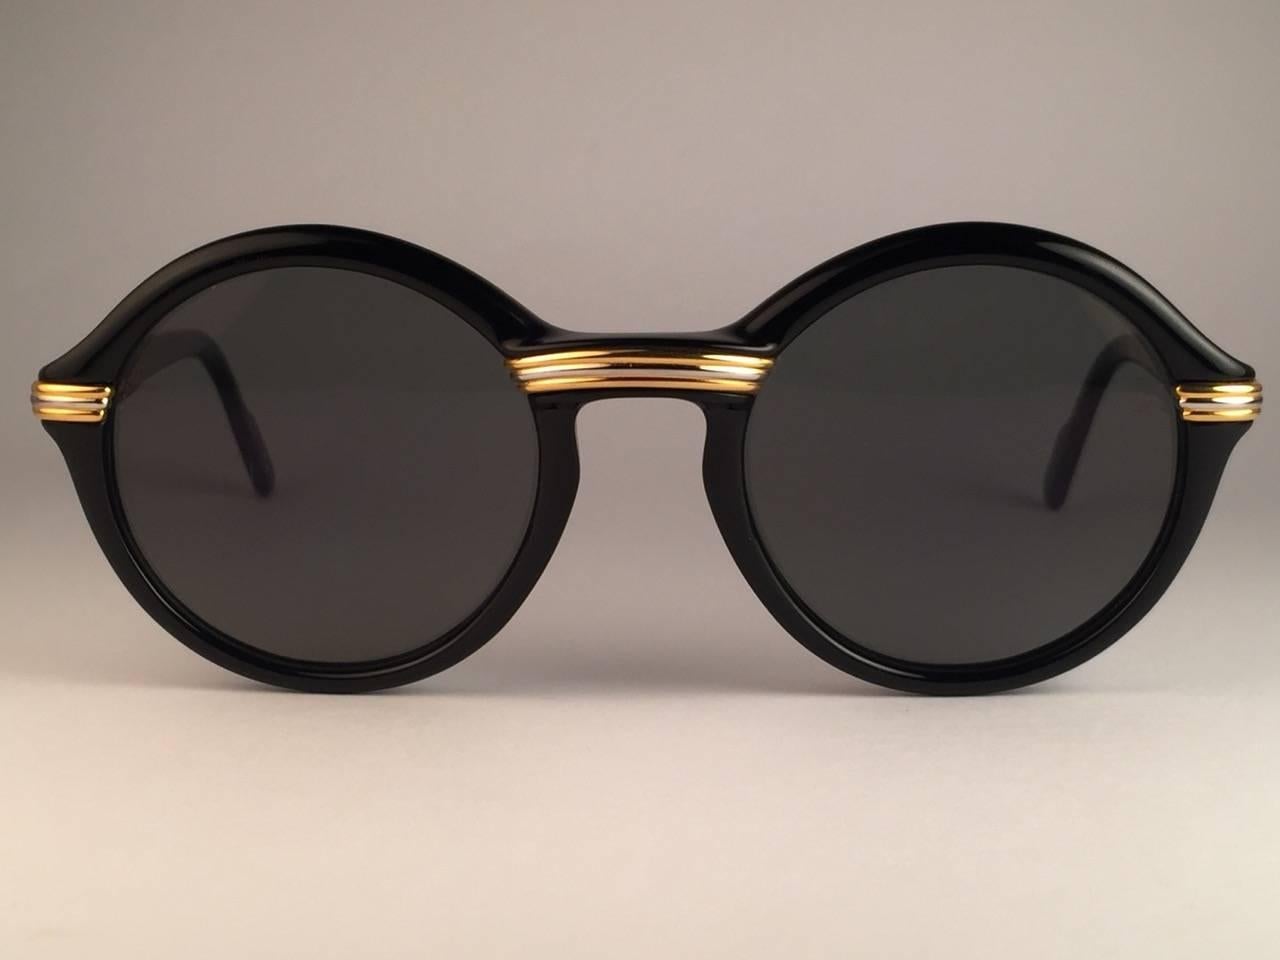 Vintage  1991 Original Cartier Cabriolet Art Deco Black & Gold Sunglasses with grey slight mirror  ( uv protection ) lenses. 
Frame has the famous real gold and white gold accents in the middle and on the sides.  All hallmarks. Cartier gold signs on